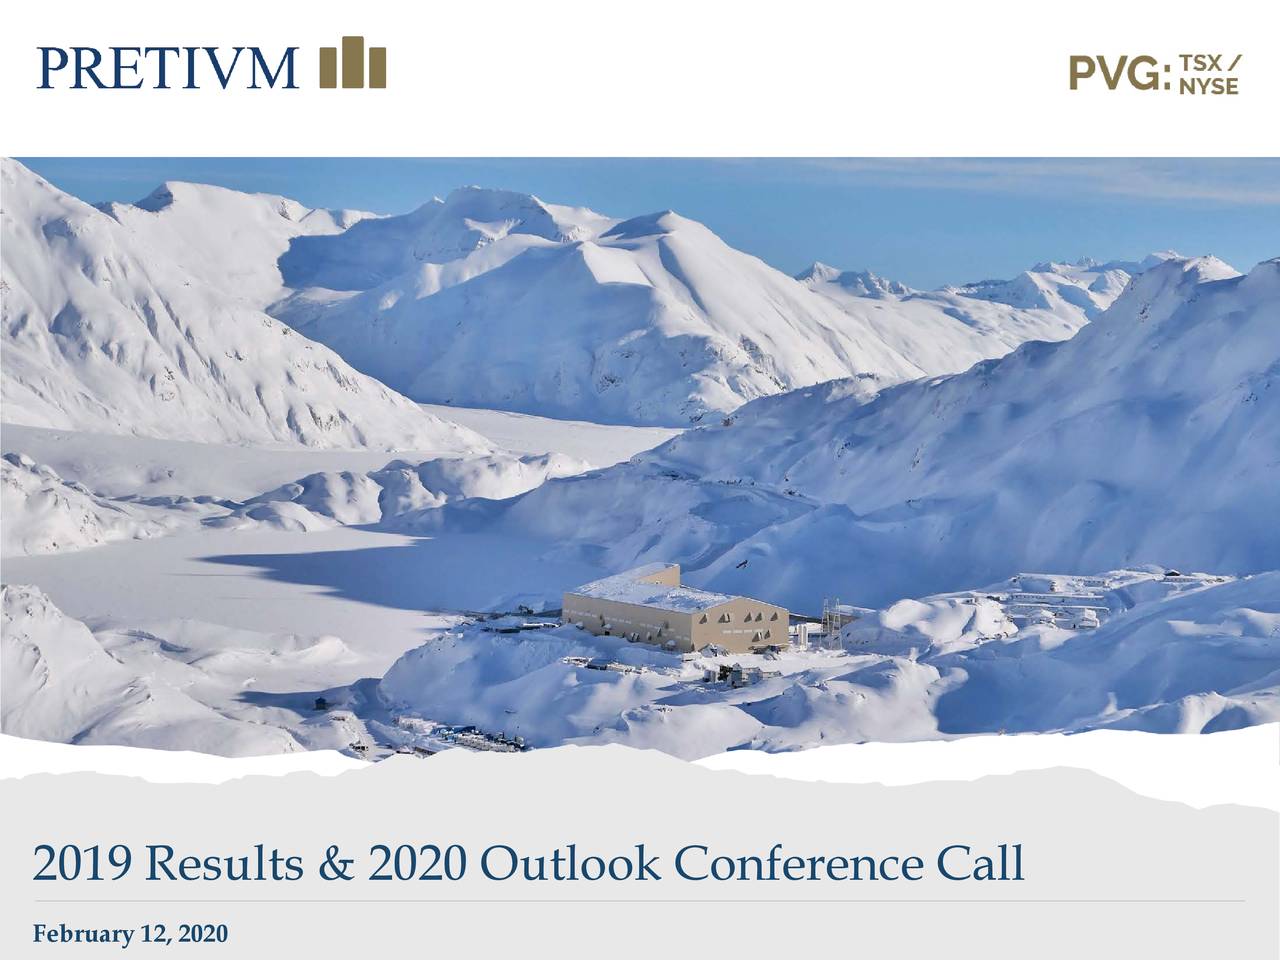 2019 Results & 2020 Outlook Conference Call